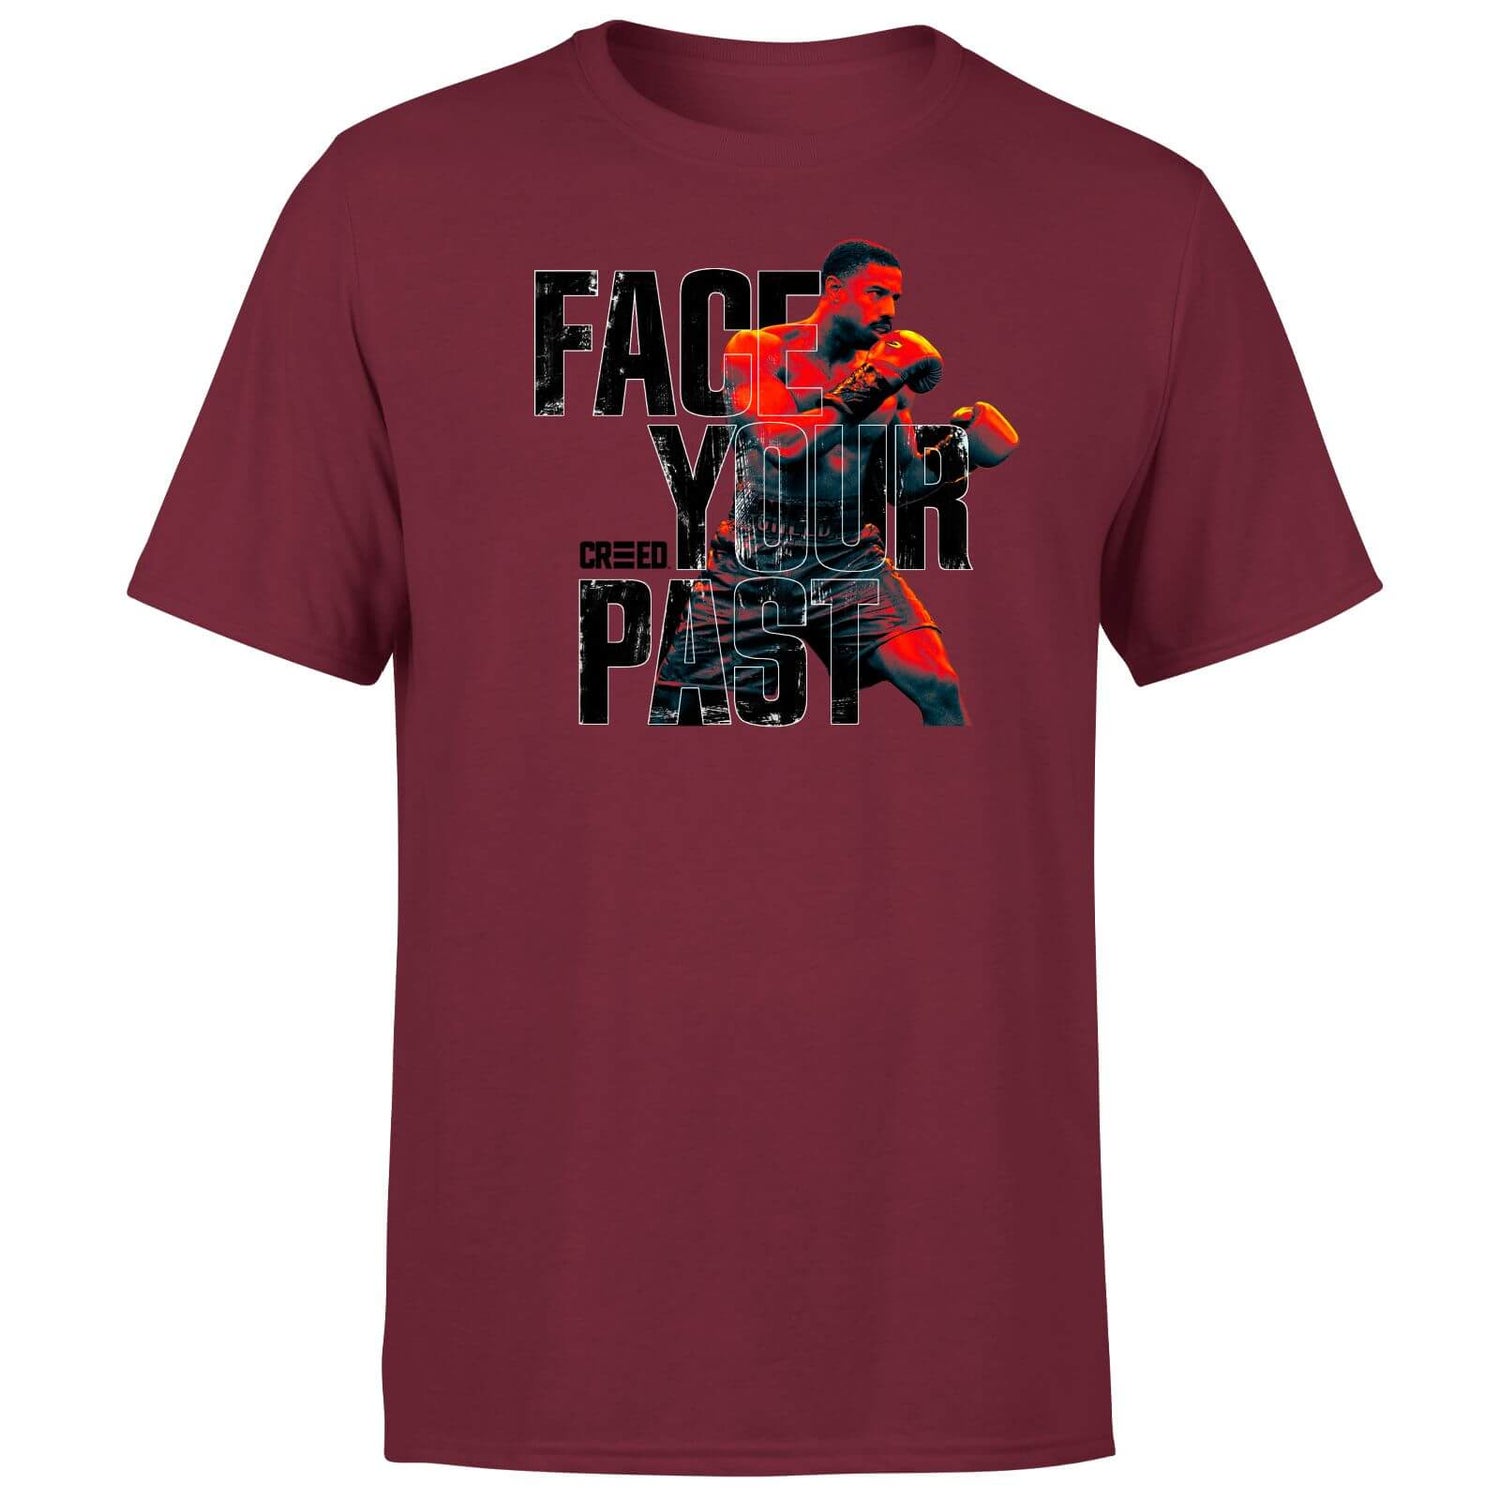 Creed Face Your Past Men's T-Shirt - Burgundy - XS